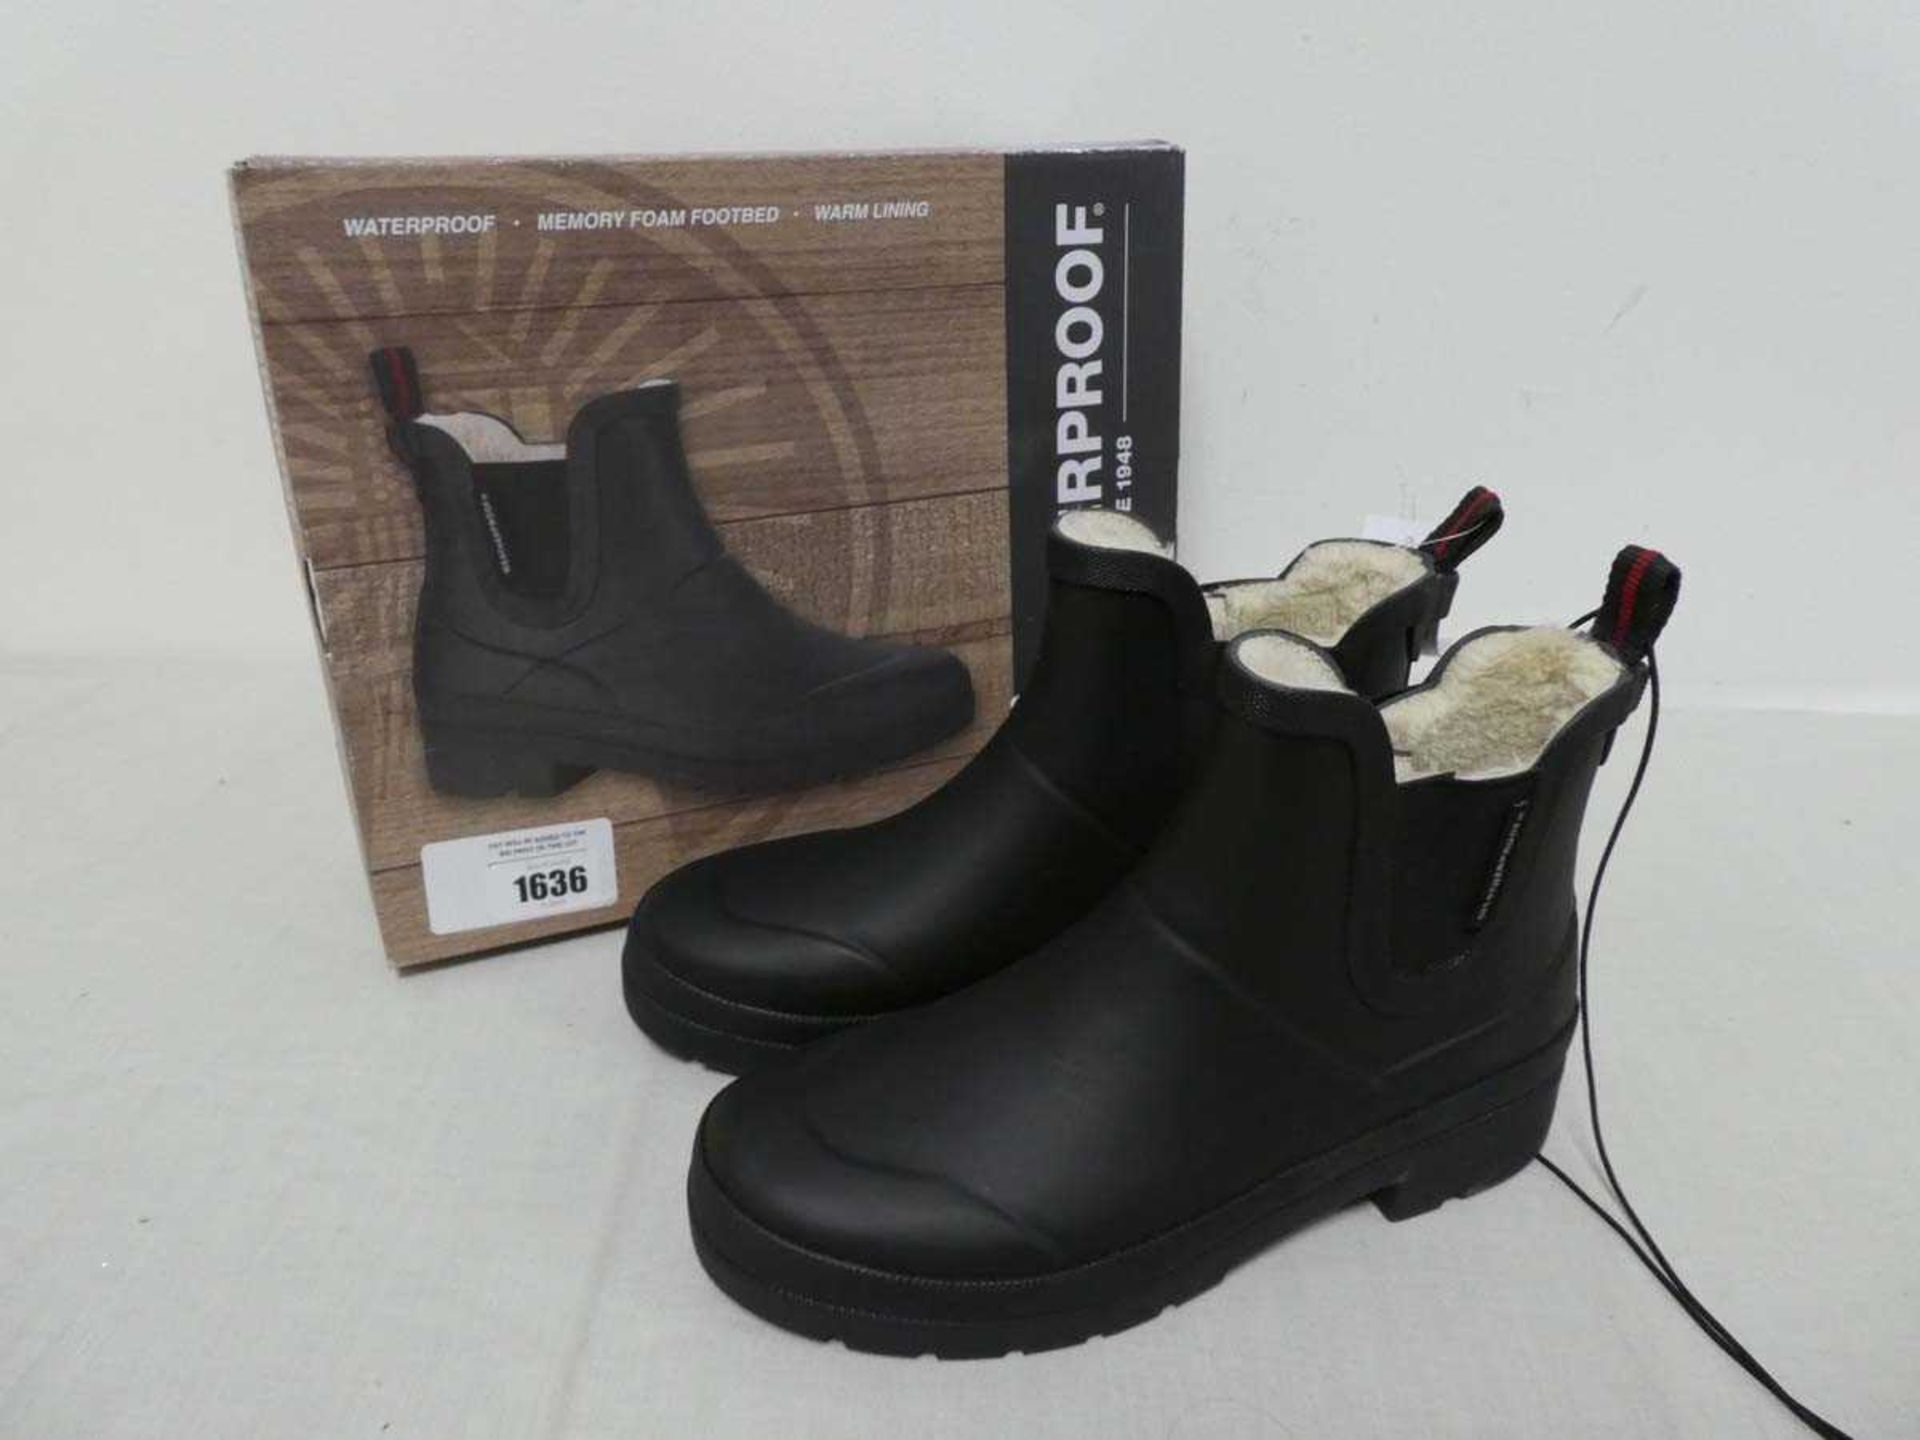 +VAT Pair of boxed womens Weatherproof ankle sock-lined wellies in black (size 6)